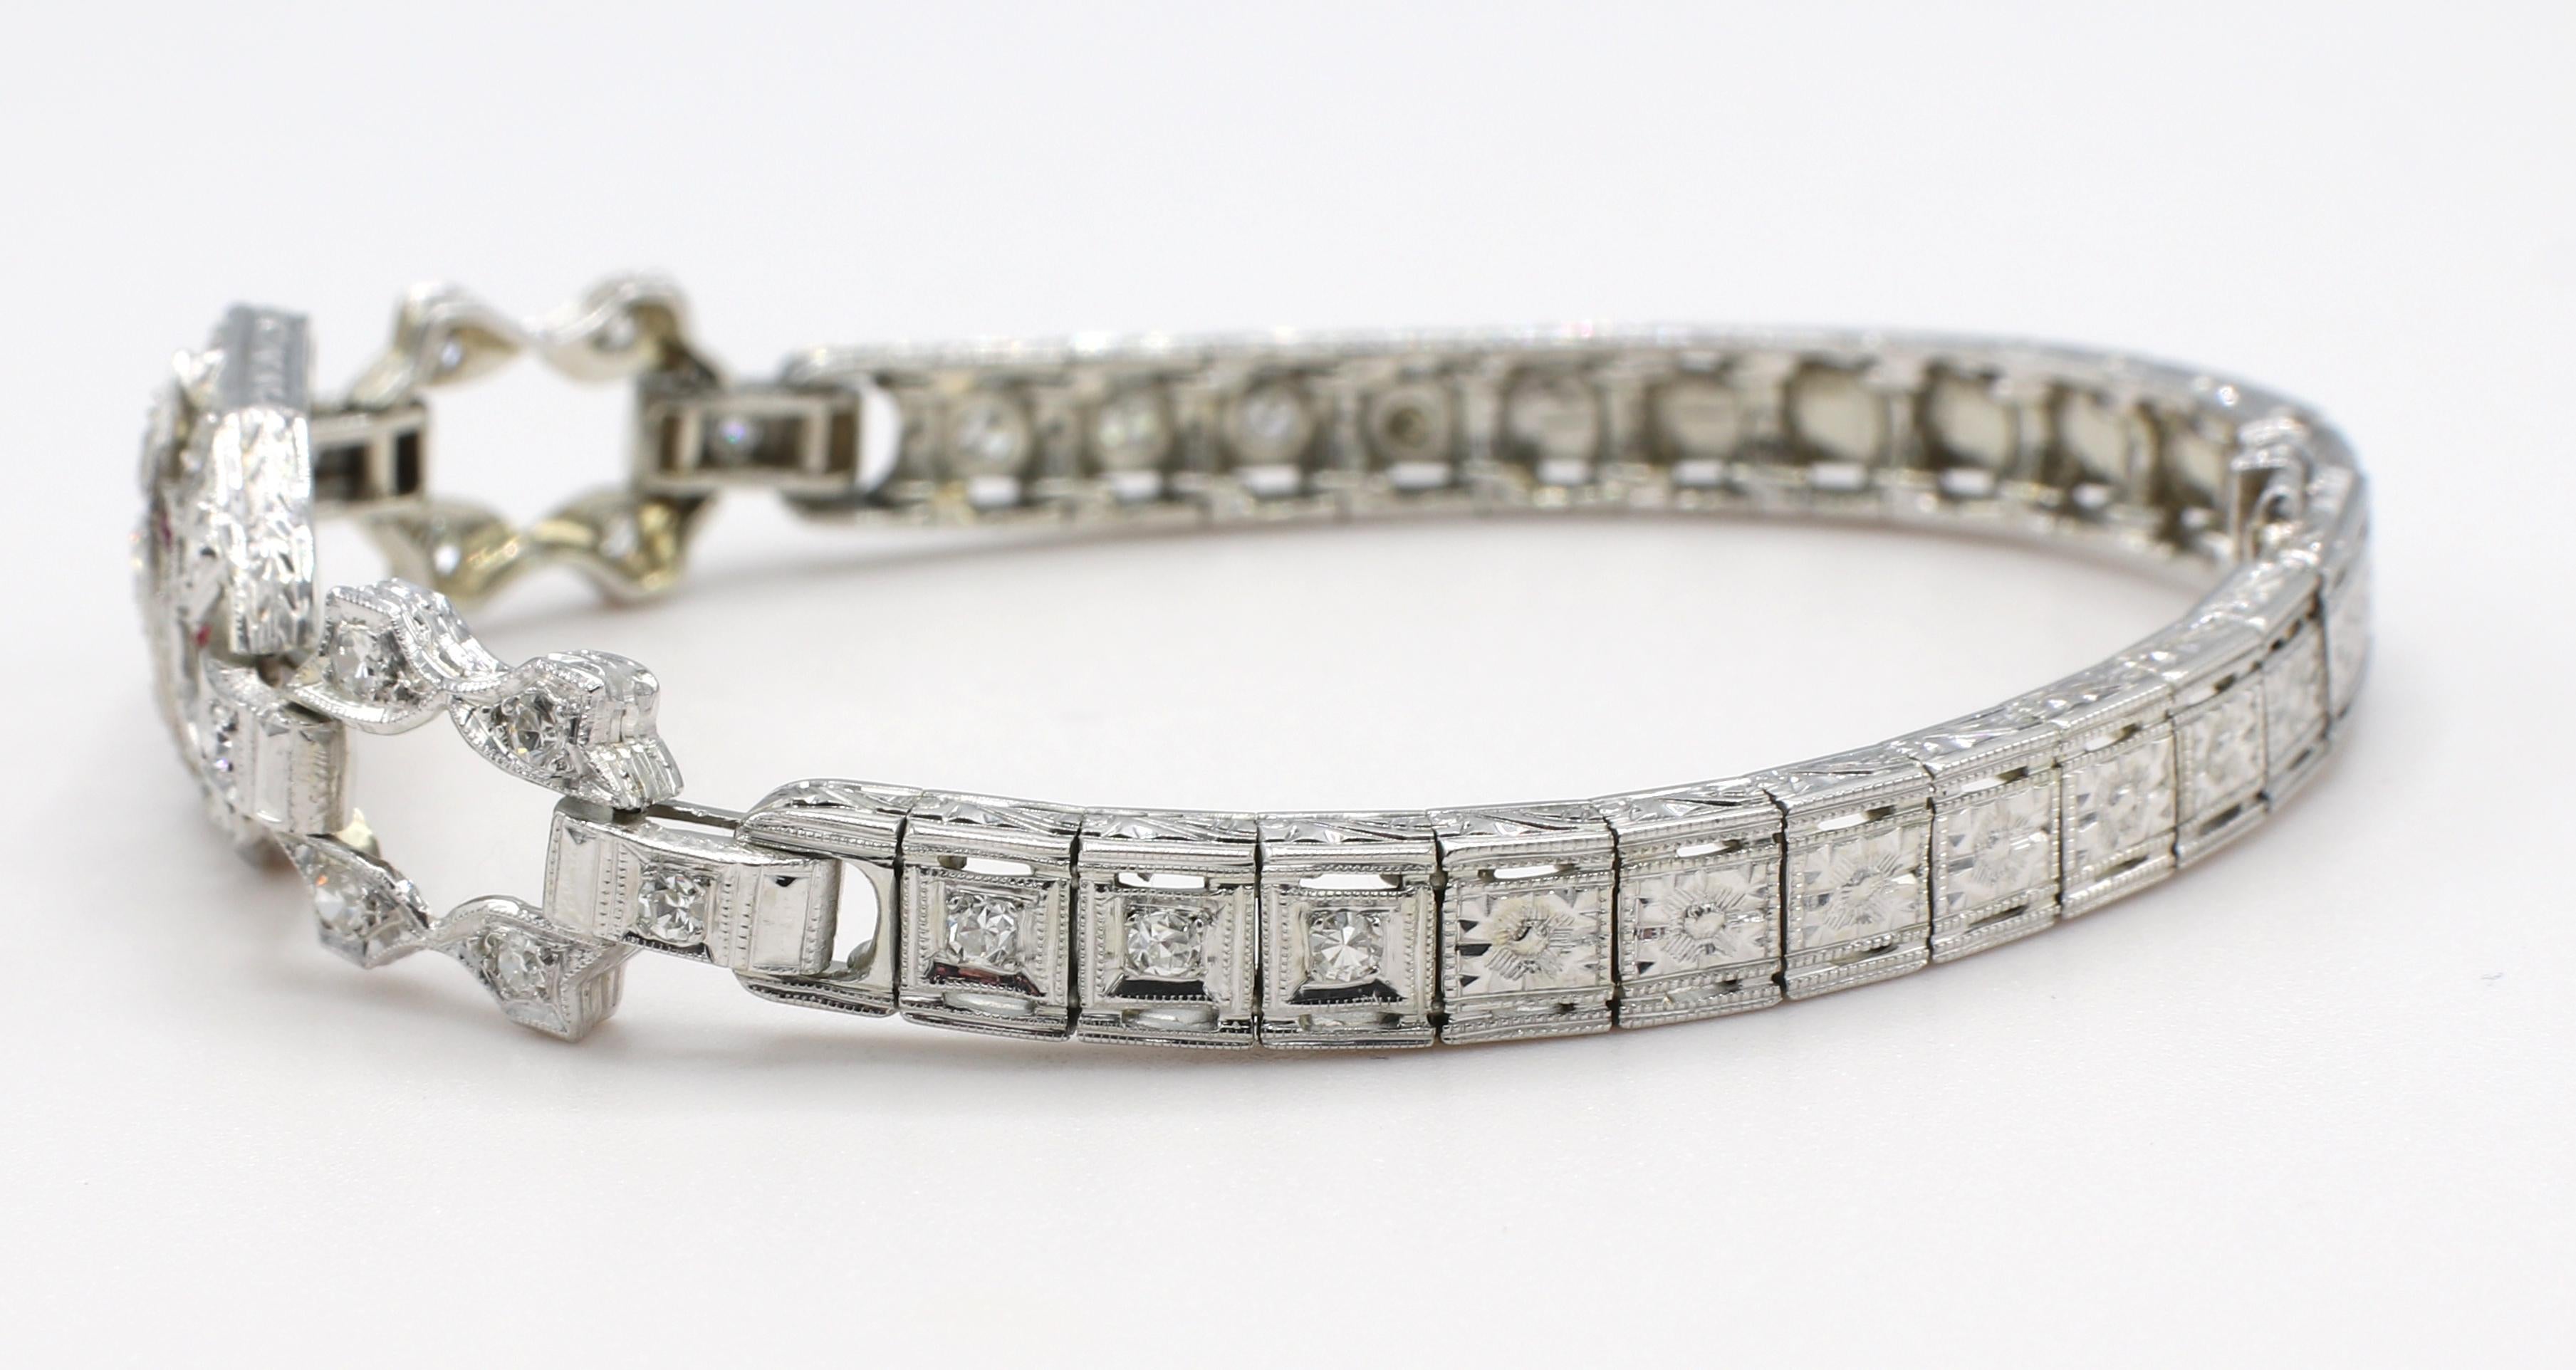 Art Deco White Gold Diamond & Ruby Bracelet 
Metal: 14k white gold
Weight: 15.8 grams
Diamonds: Approx. 1 CTW Old European cut and single cut round diamonds G-H VS
Length: 6.5 inches
Width: 5.5 - 13mm